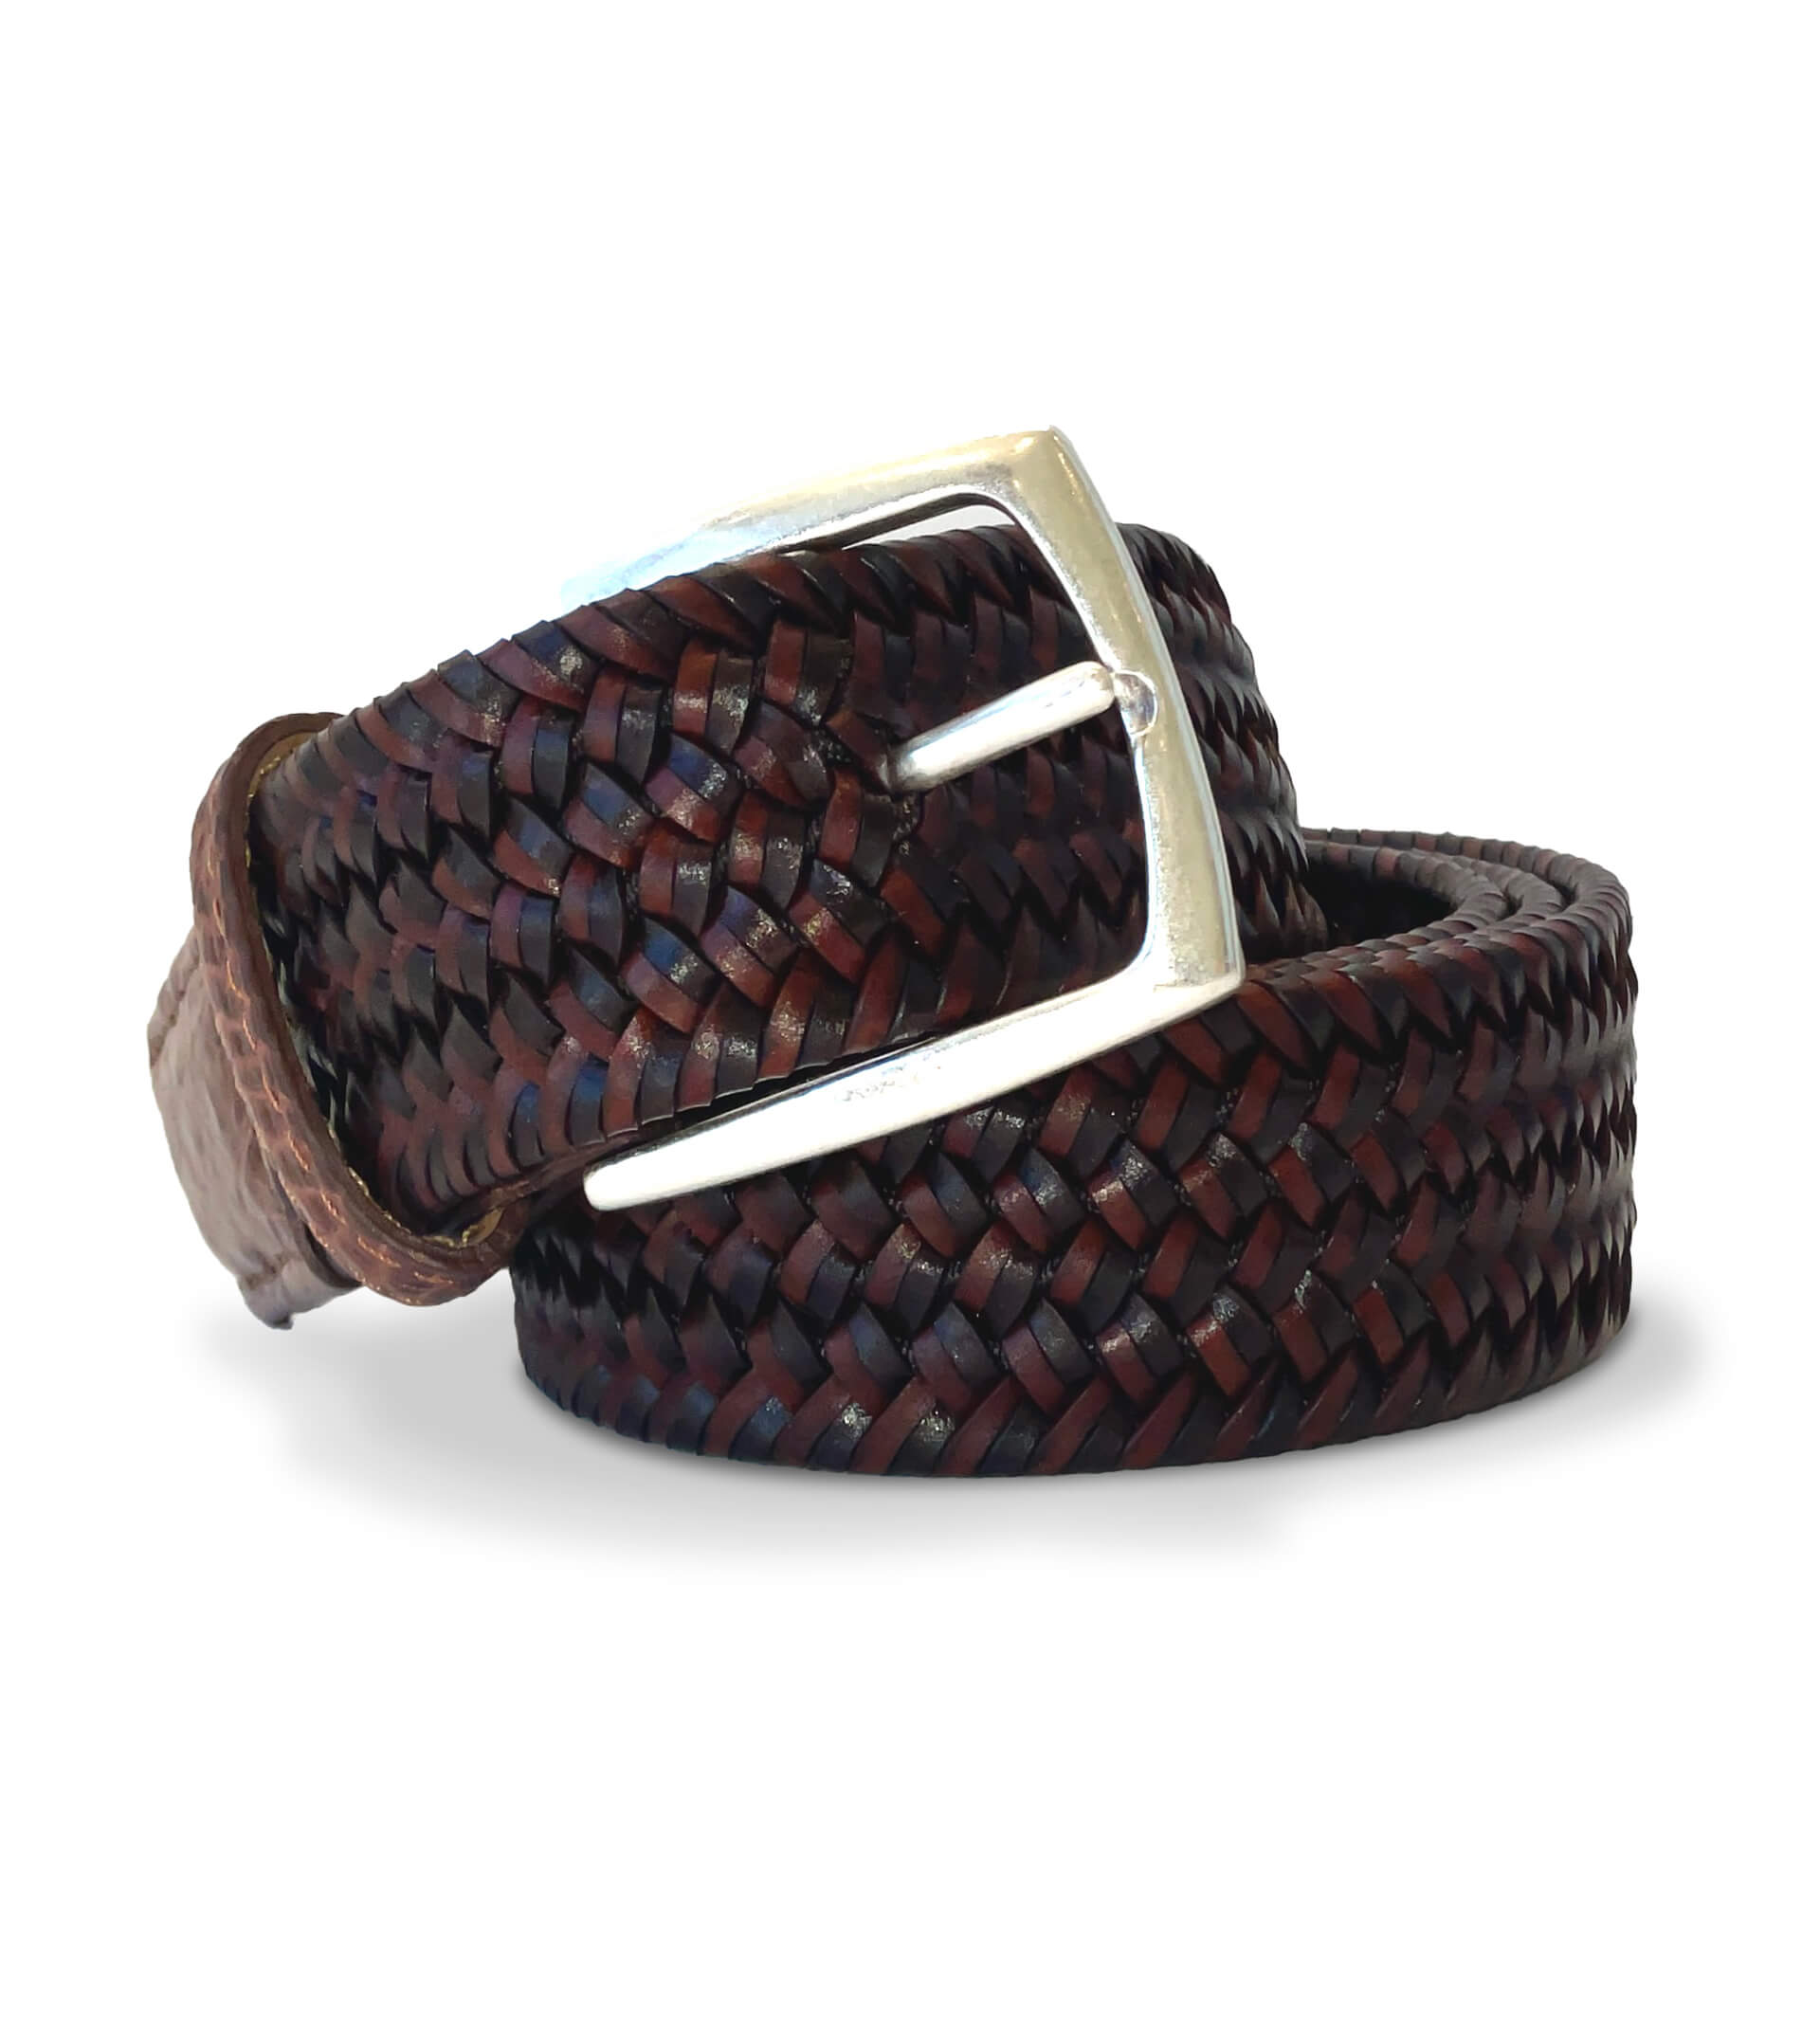 Indigo Woven Belt with Croc Tabs and Brushed Nickel Buckle - w.kleinberg